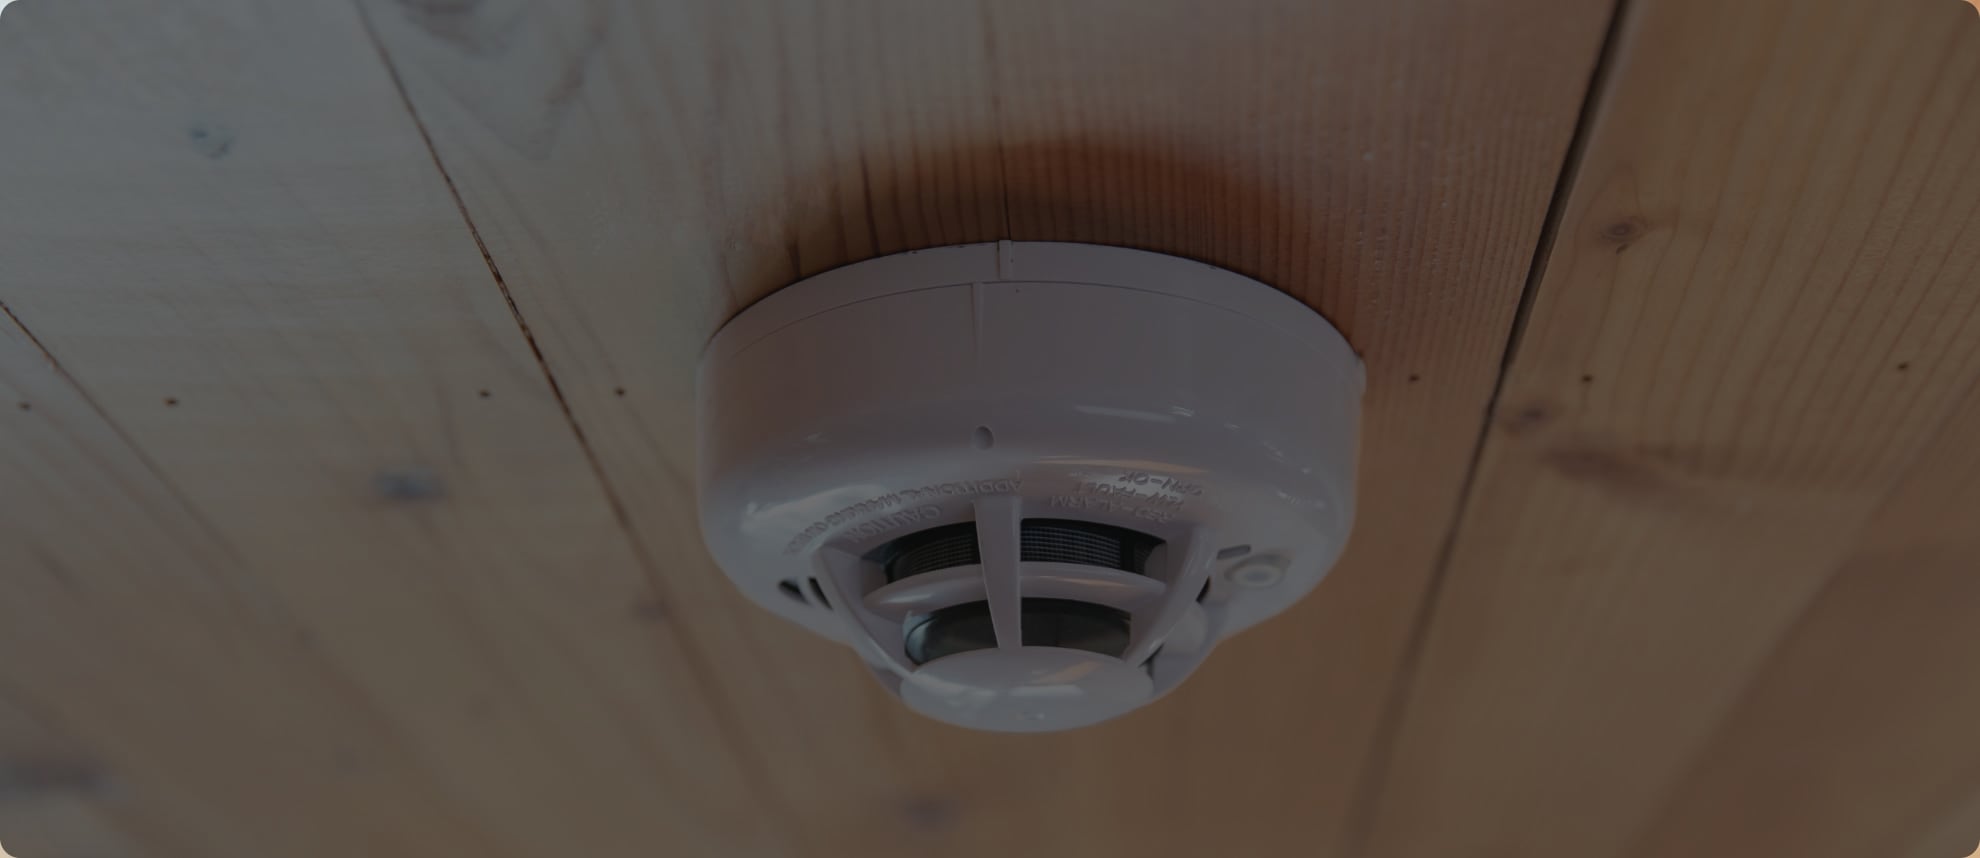 Vivint Monitored Smoke Alarm in South Bend